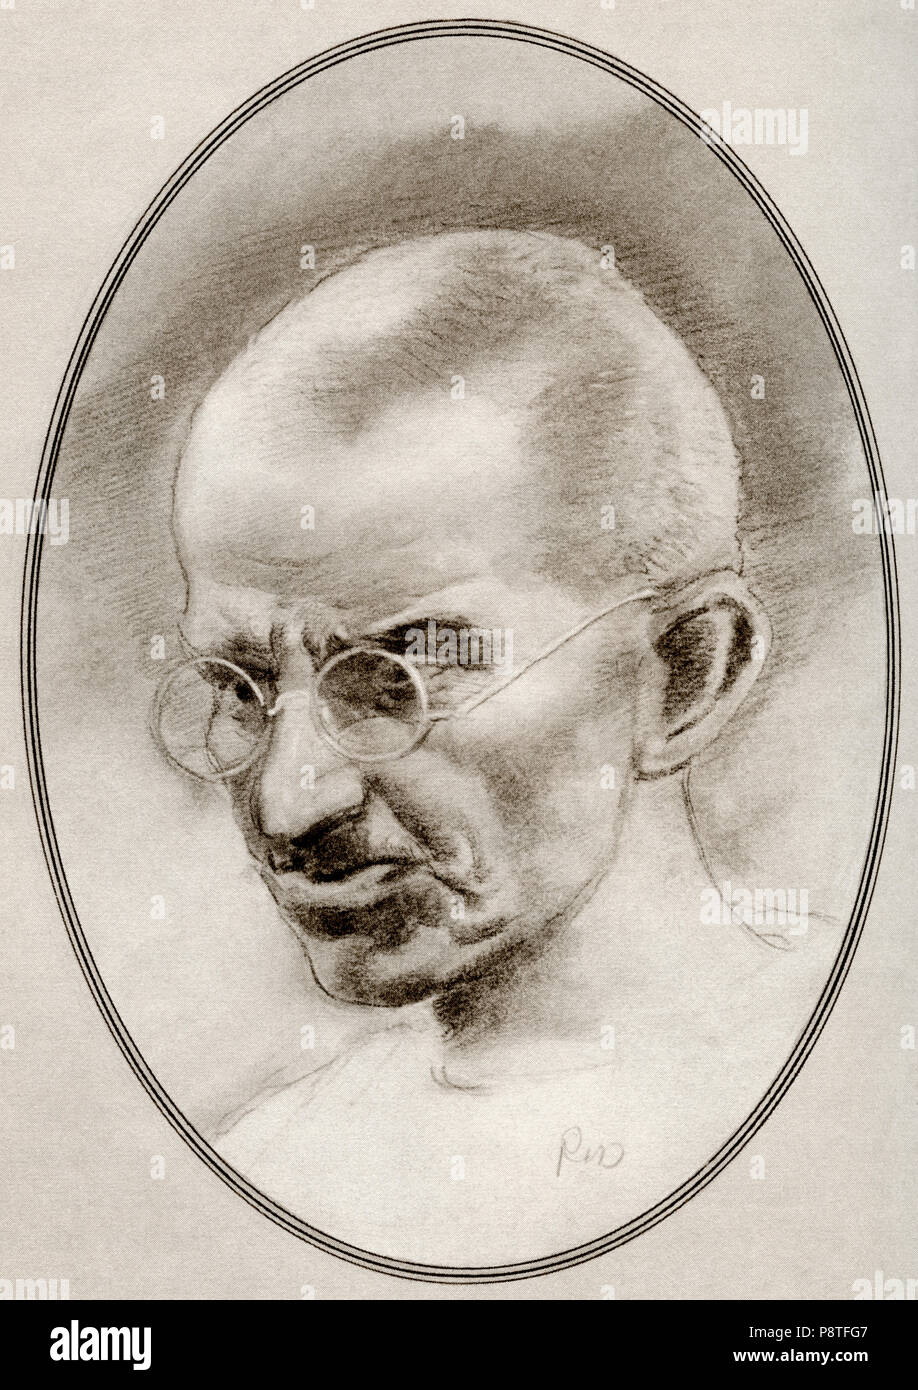 Mohandas Karamchand Gandhi, 1869 – 1948.   Indian activist, the leader of the Indian independence movement against British rule. Illustration by Gordon Ross, American artist and illustrator (1873-1946), from Living Biographies of Religious Leaders. Stock Photo